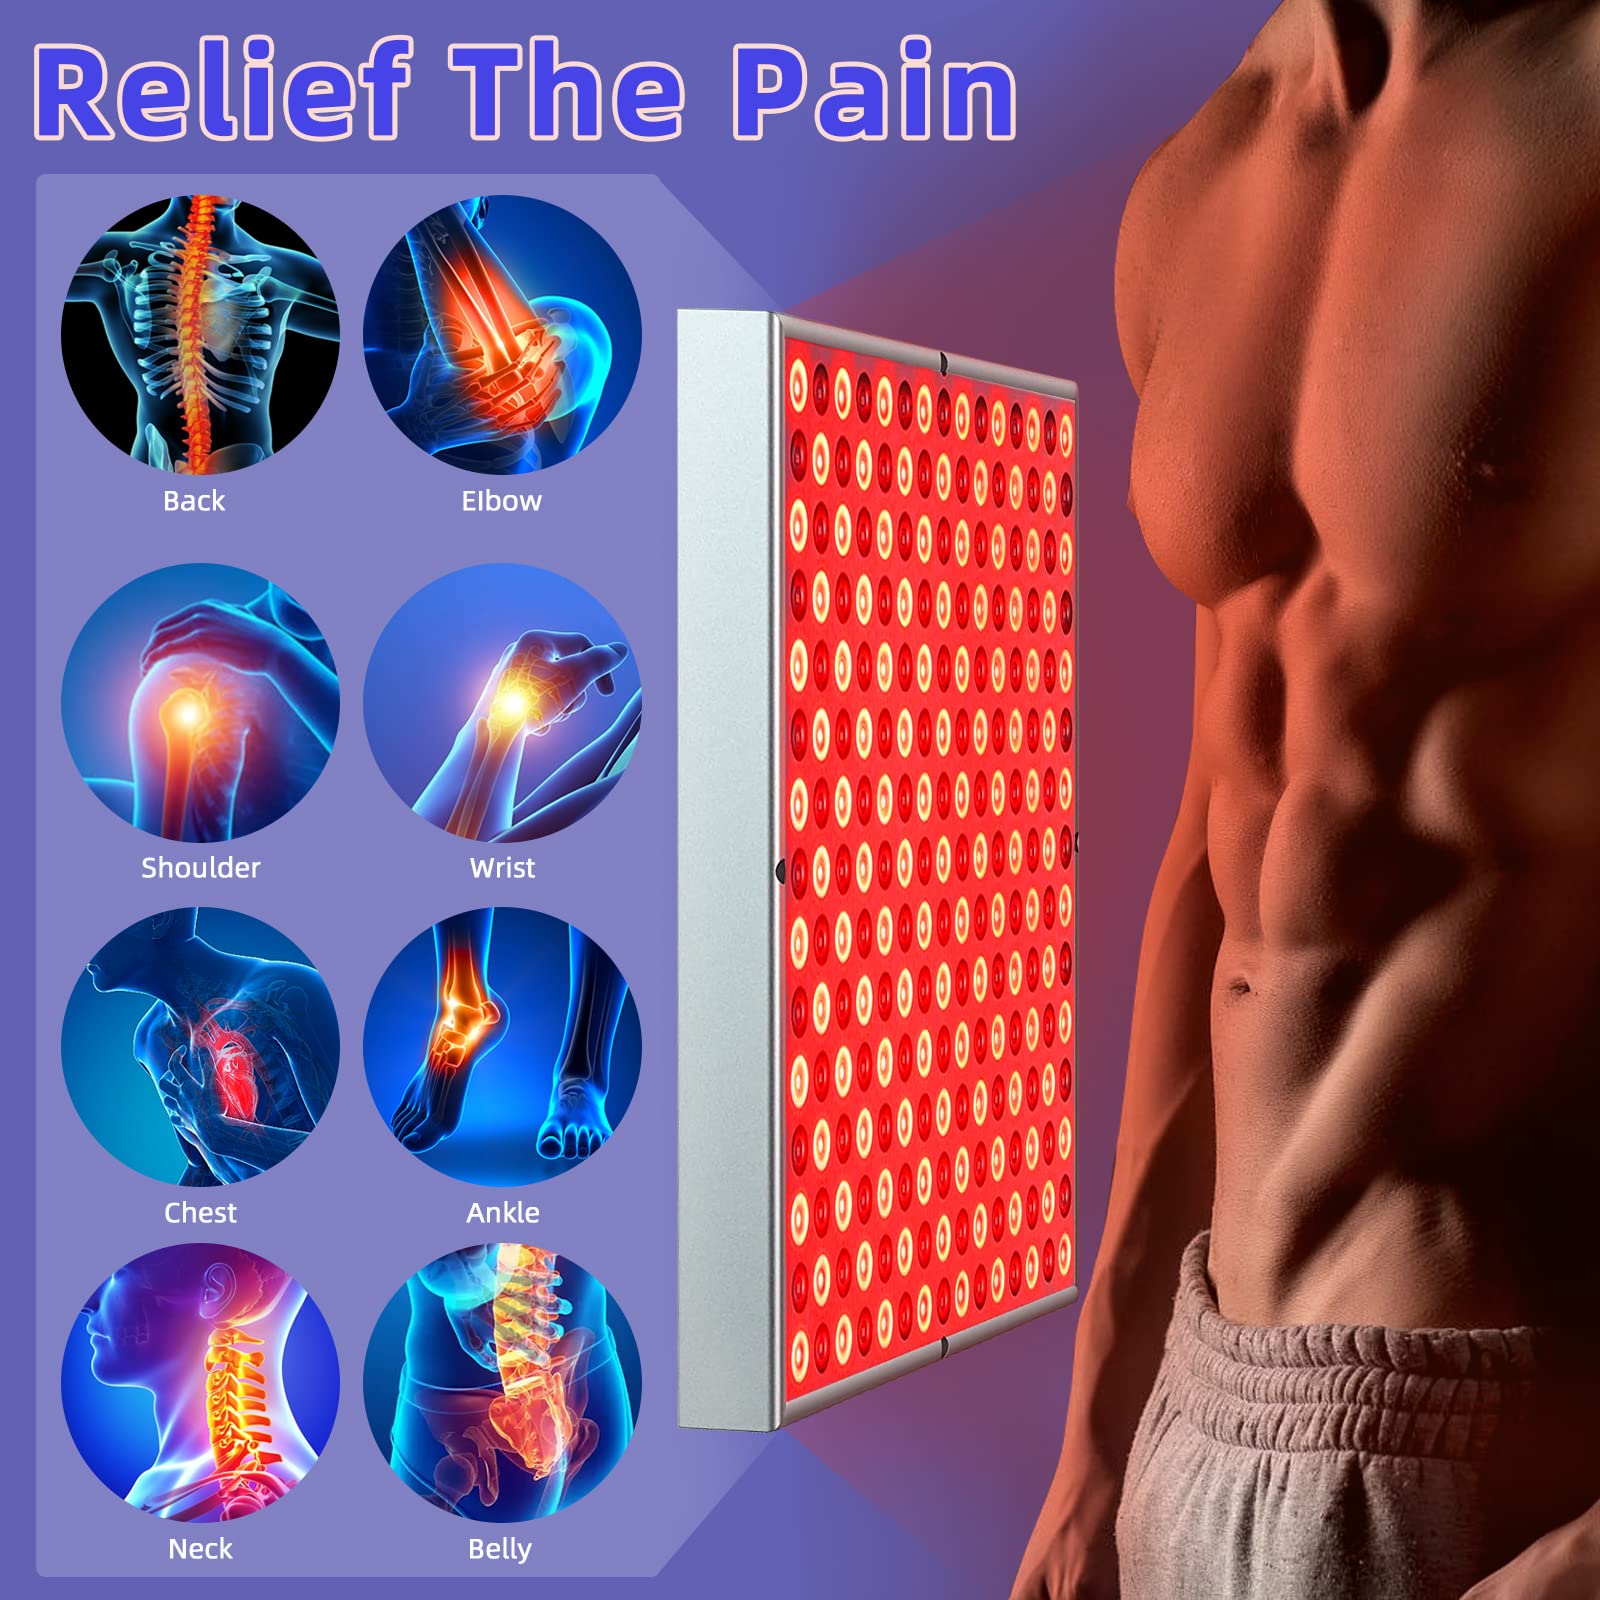 Infrared Red Light Therapy Panel